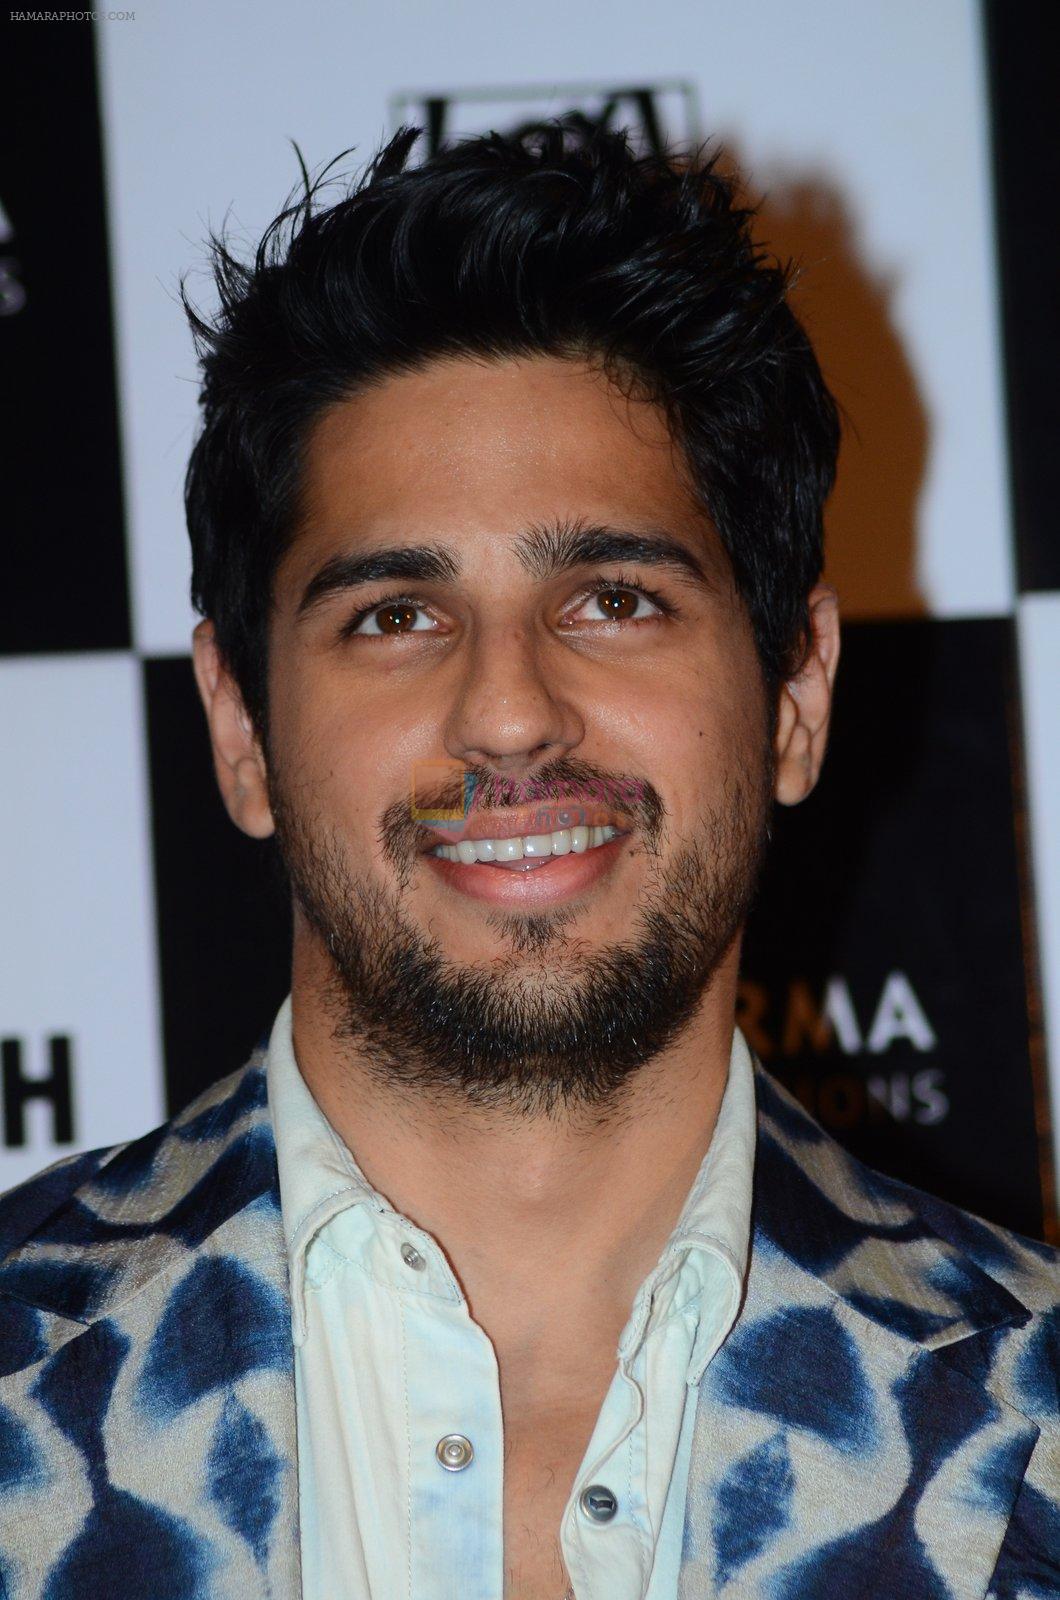 Sidharth Malhotra at Kapoor n sons trailor launch on 10th Feb 2016